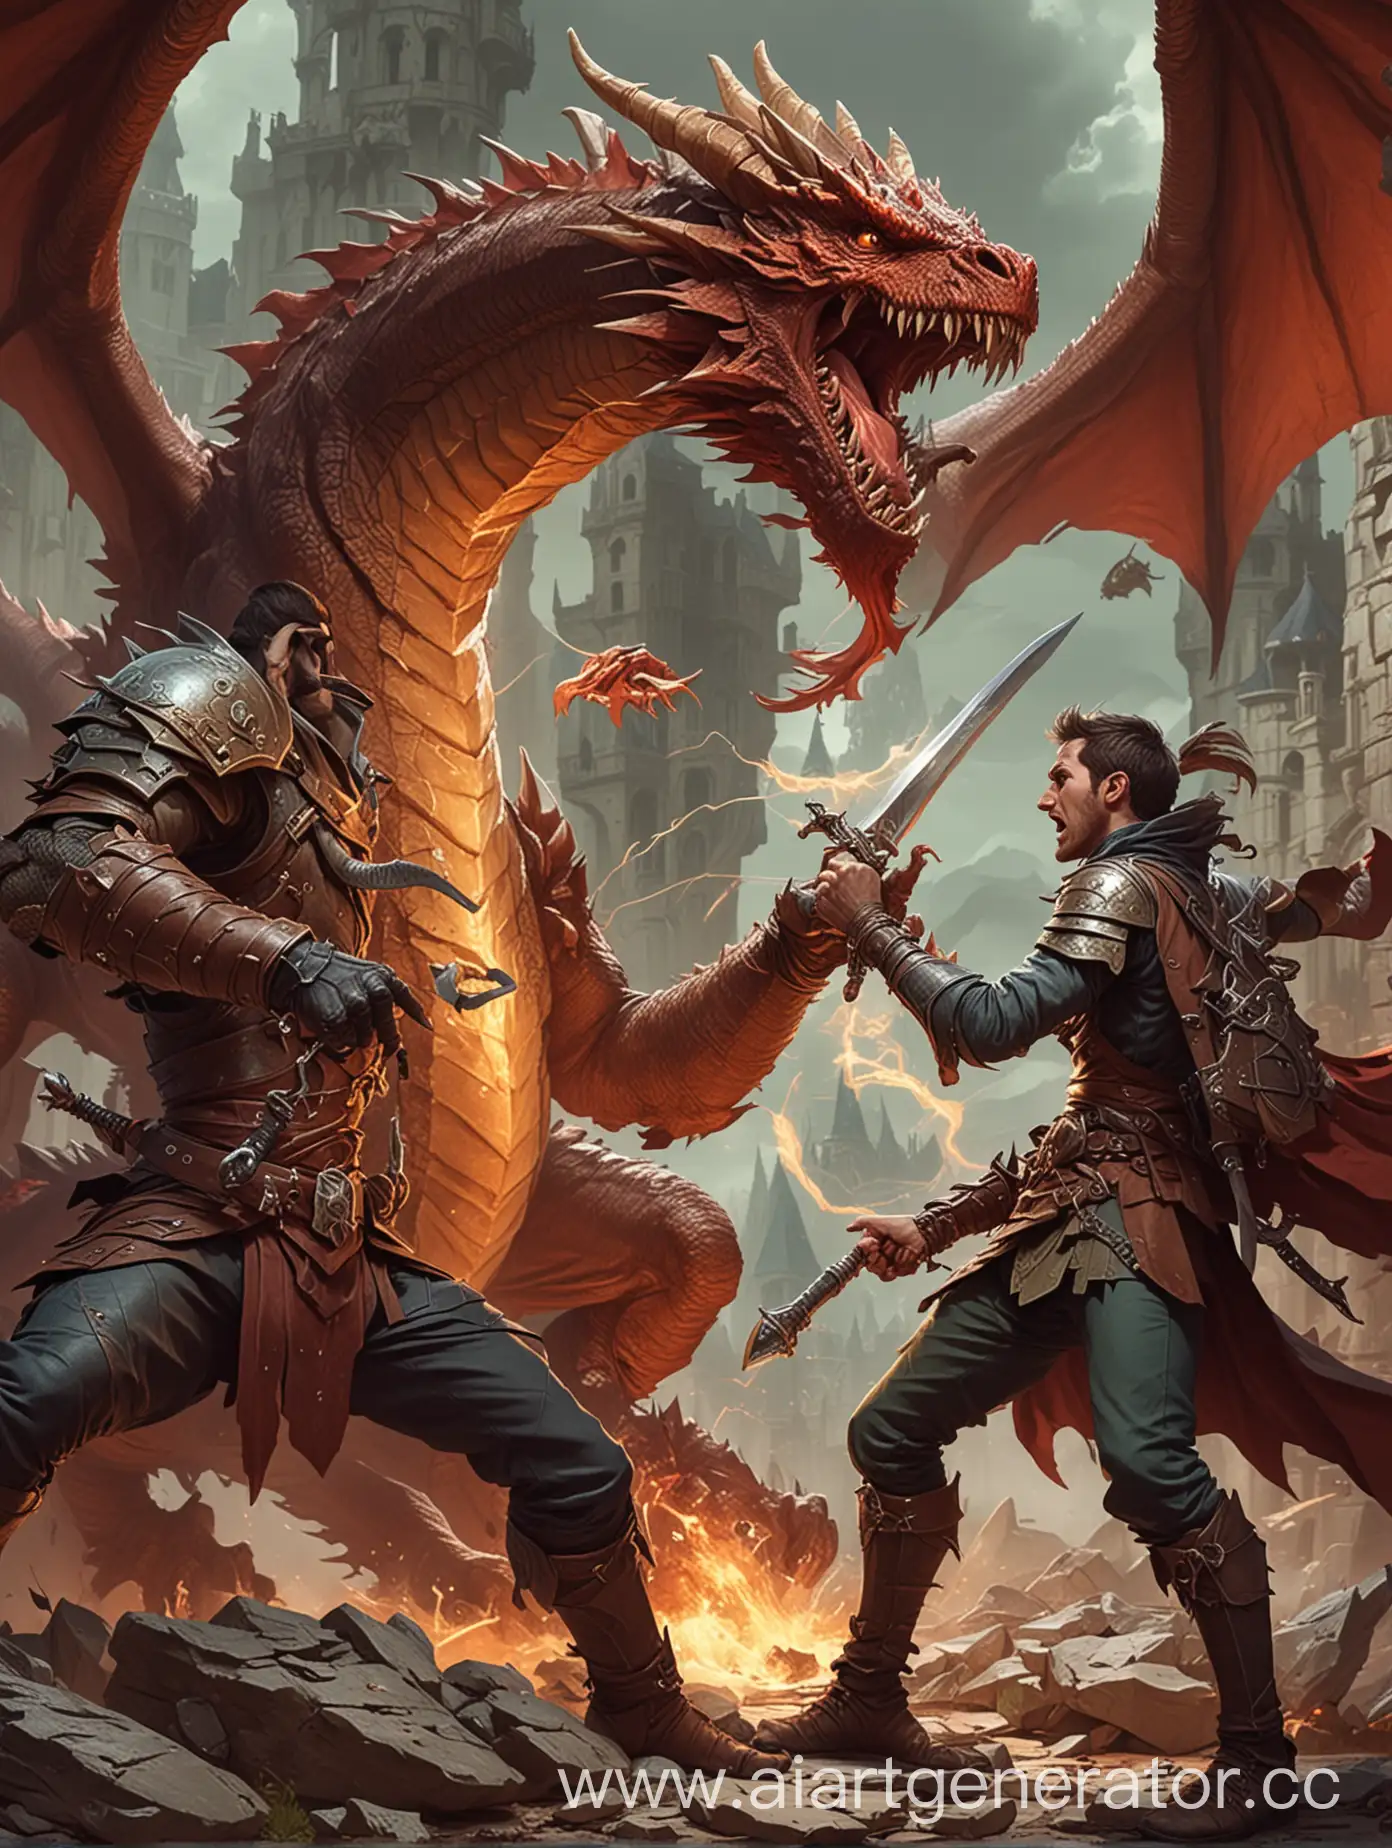 Web-Developer-Battling-Dragon-in-Dungeons-and-Dragons-Style